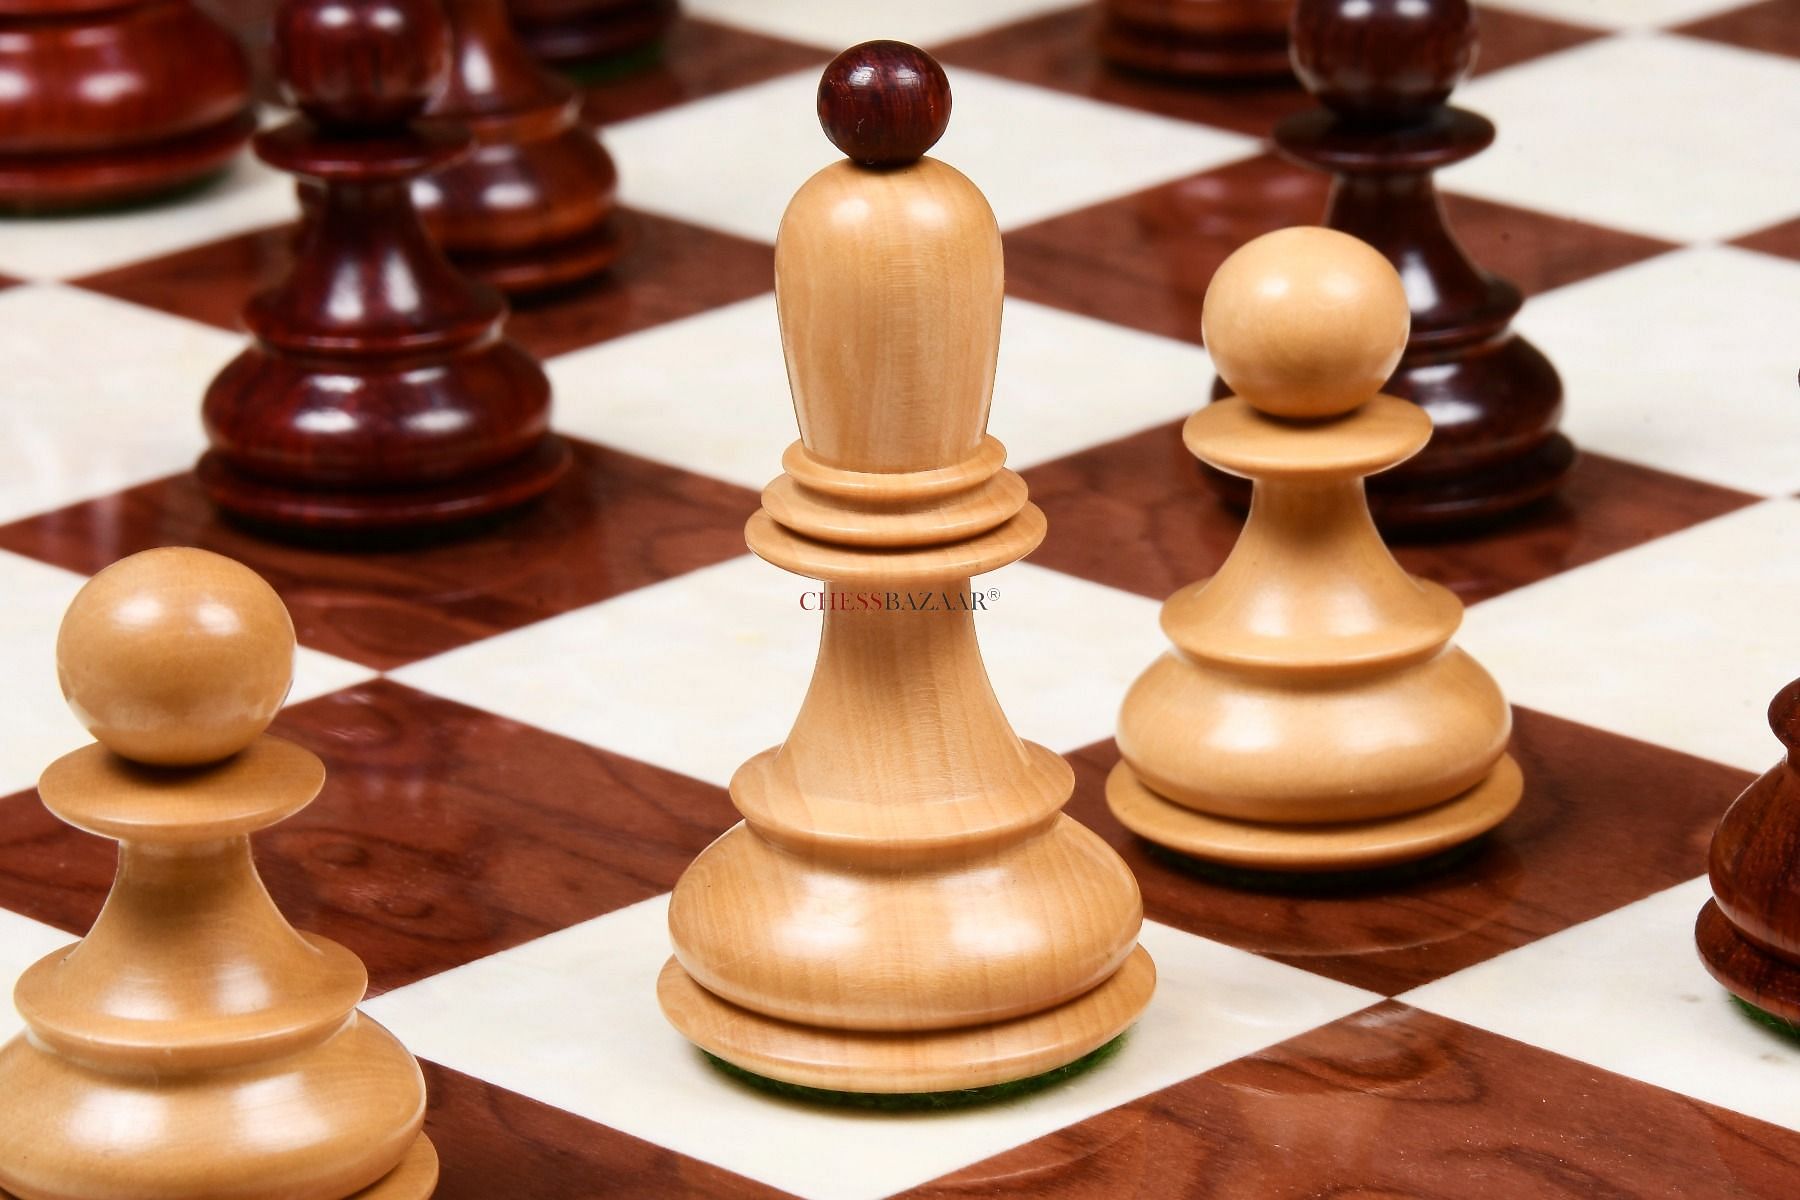 Light colored Dubrovnik chess pieces on a wooden chess board